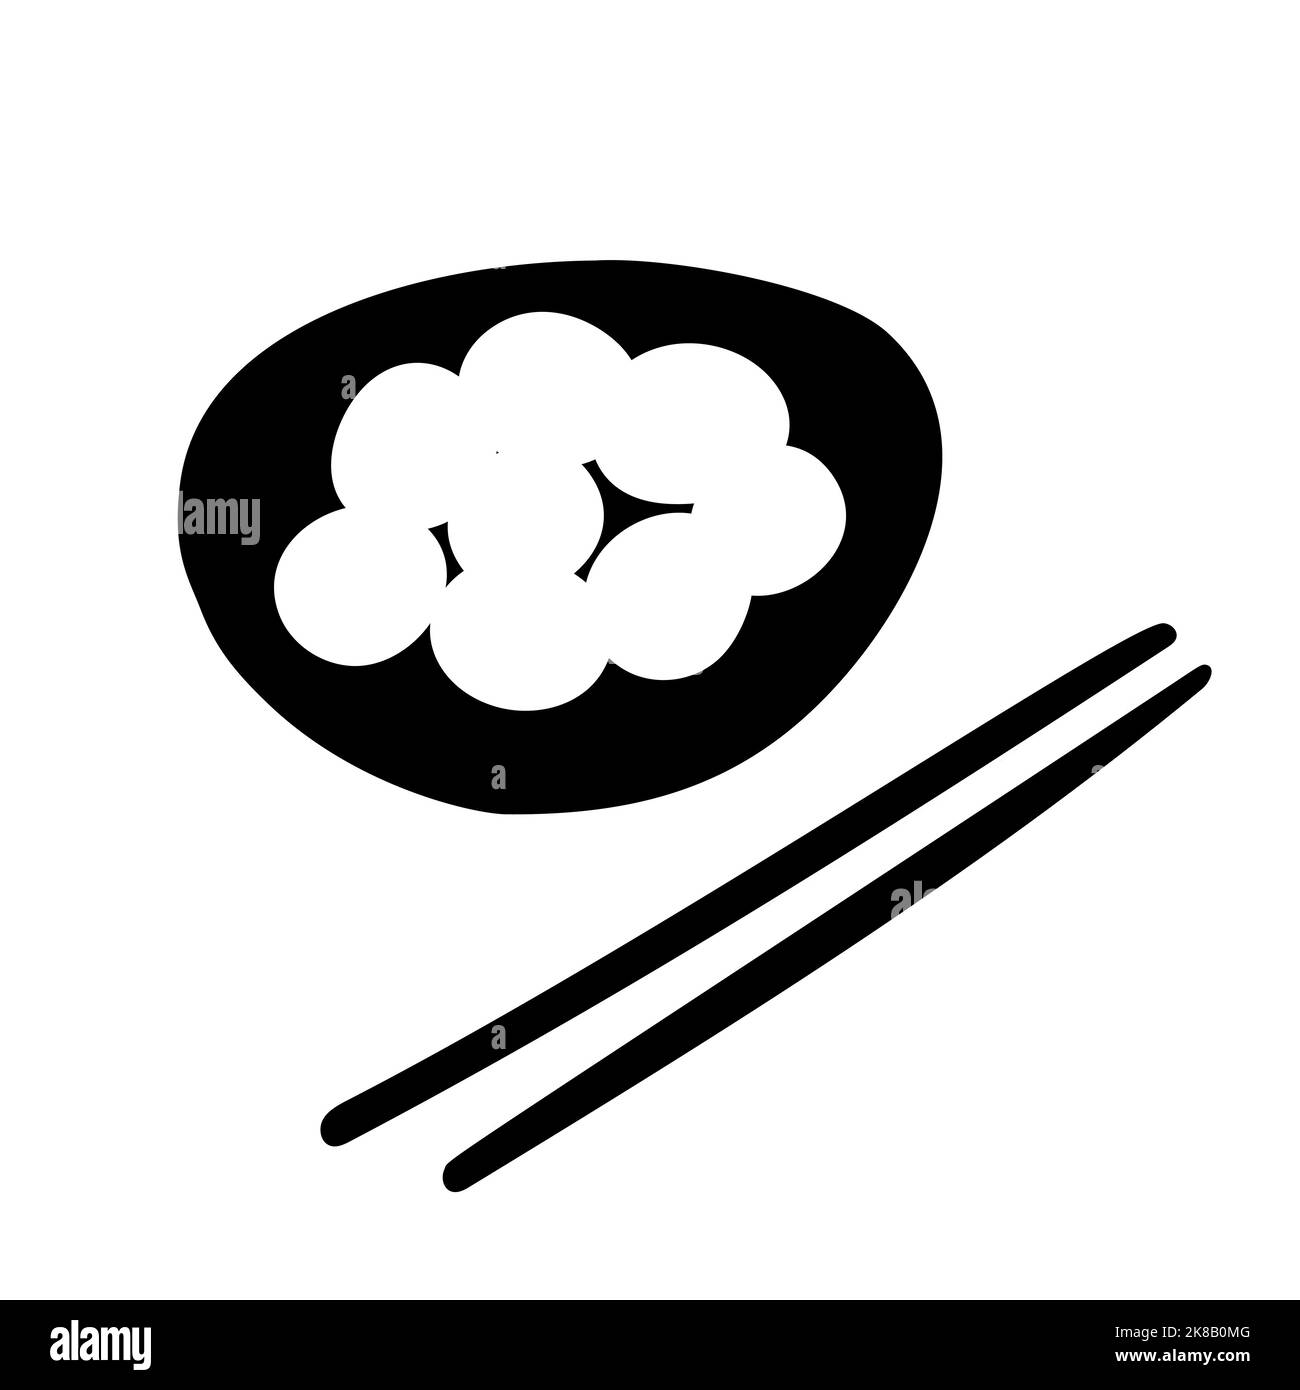 Glutinous rice balls illustration black and white color isolated Stock Vector